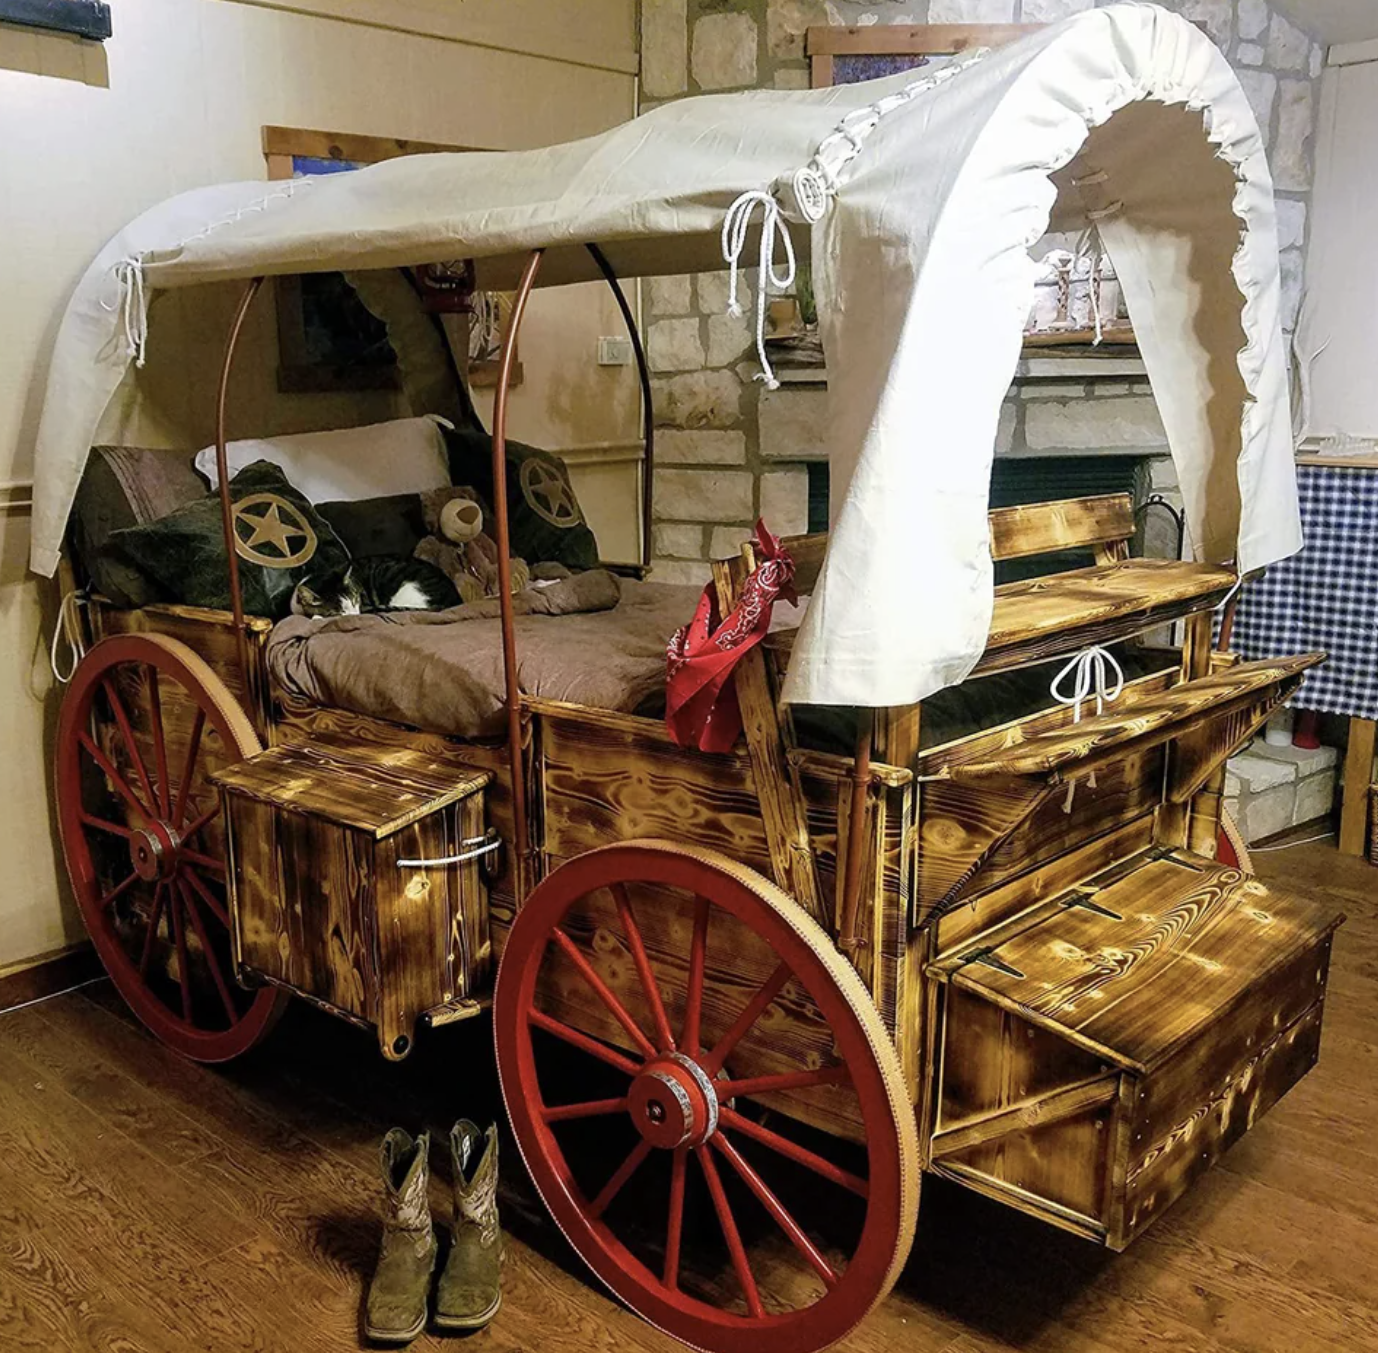 This pilgrim-themed room features a big wagon bed